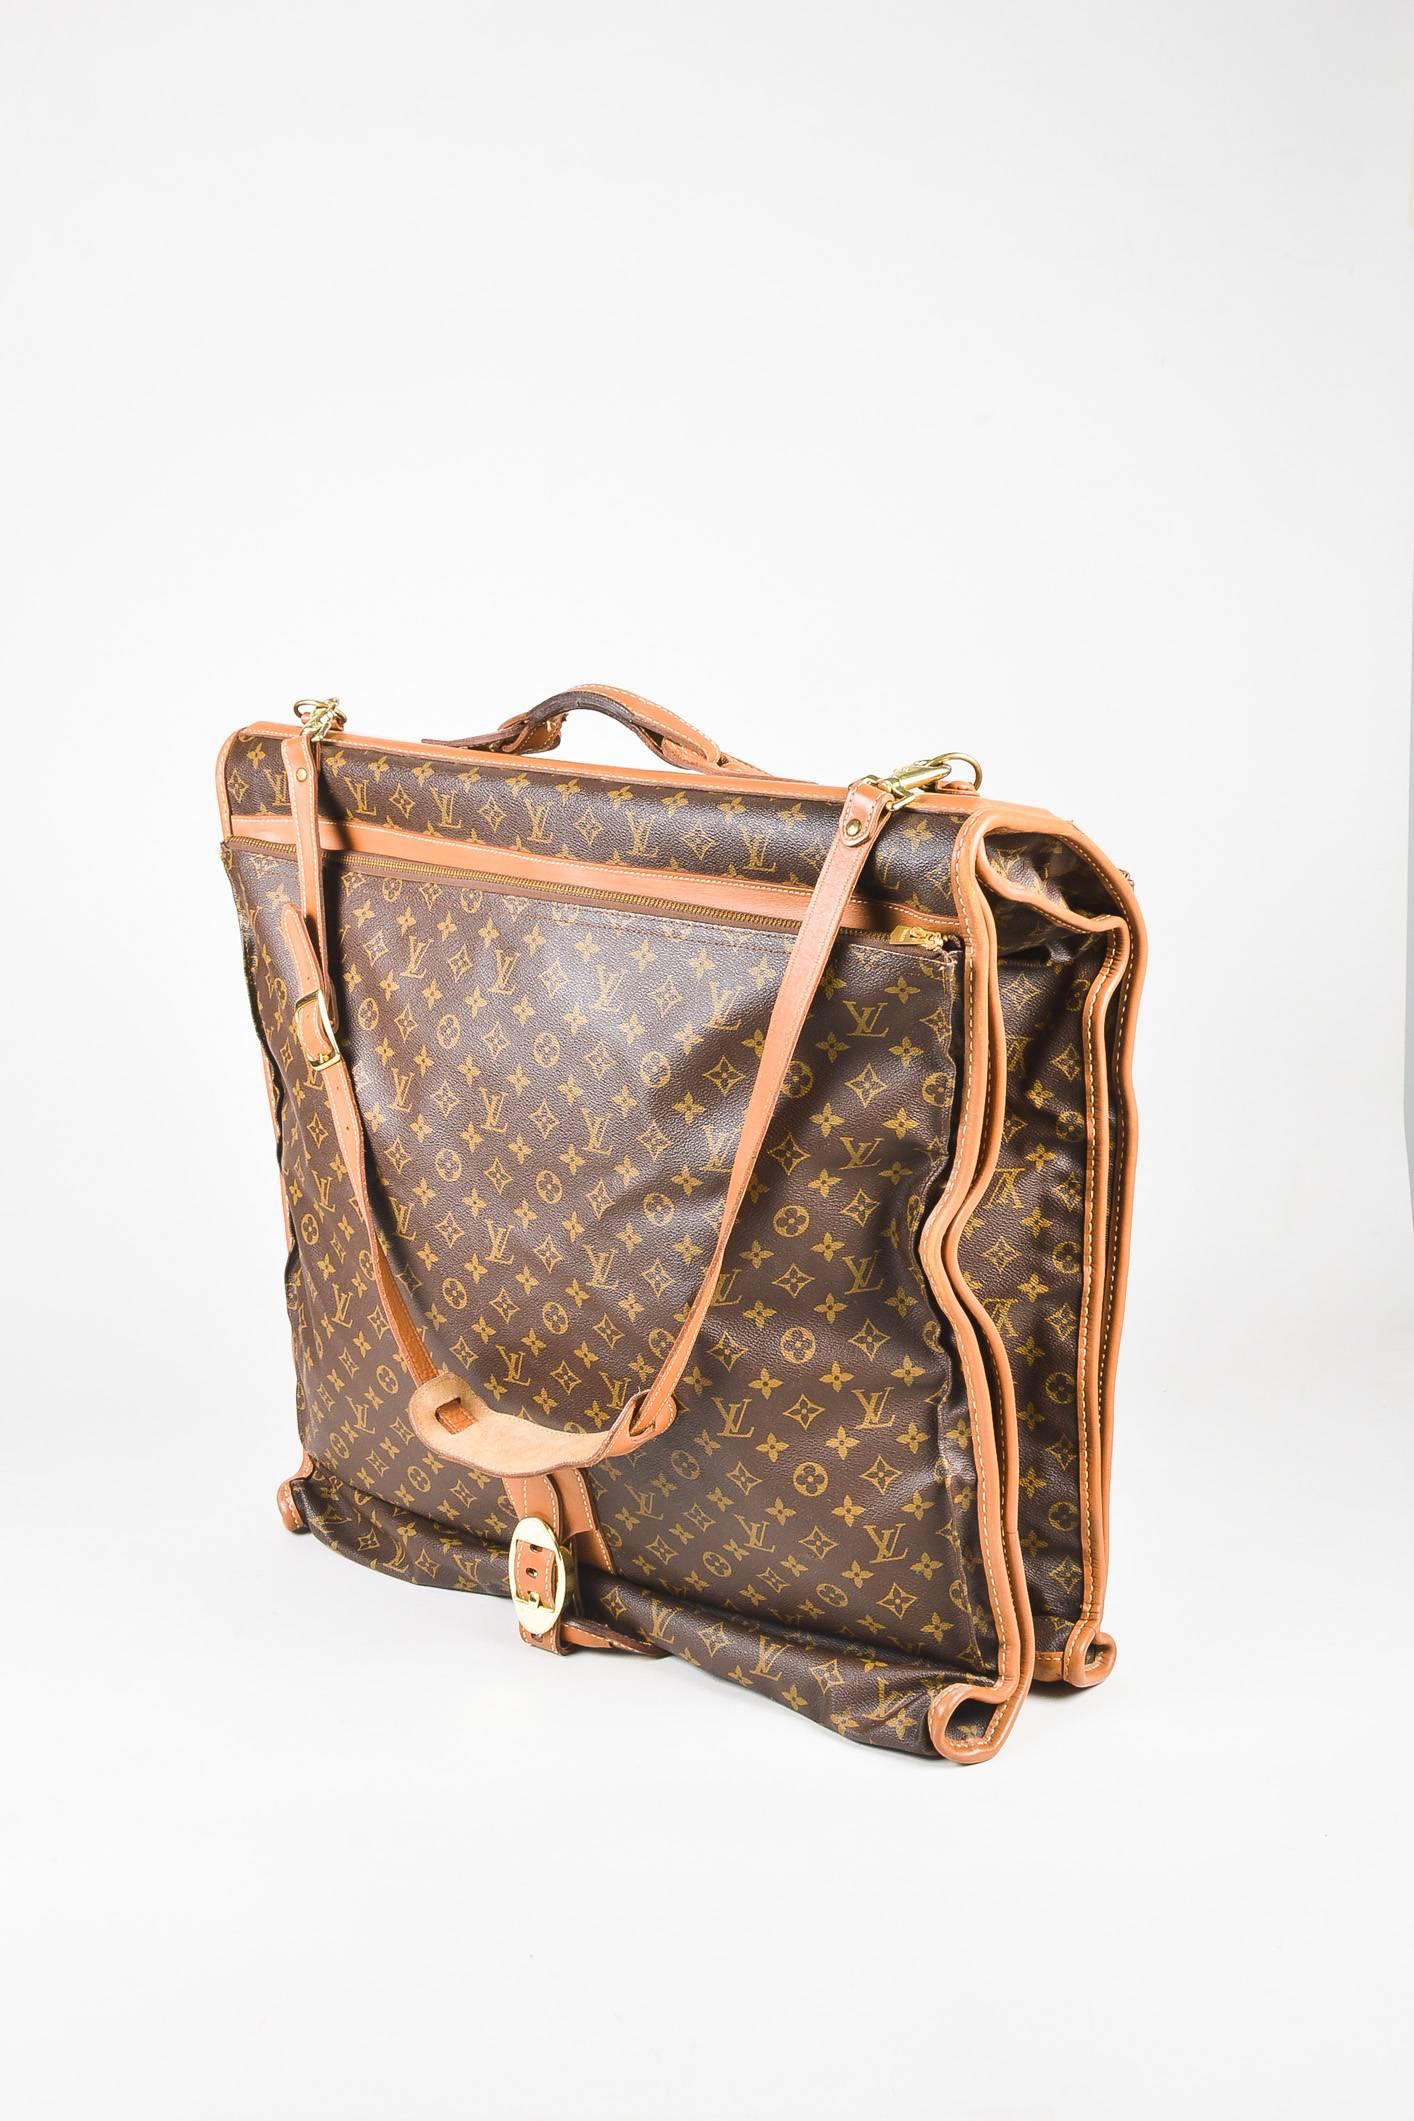 Fabric Content: Coated Canvas, Leather, Metal

Item Specifics & Details: VINTAGE Louis Vuitton and The French Luggage Company. A vintage piece of iconography, this luxurious garment bag from the 1970s/1980s is constructed of signature coated